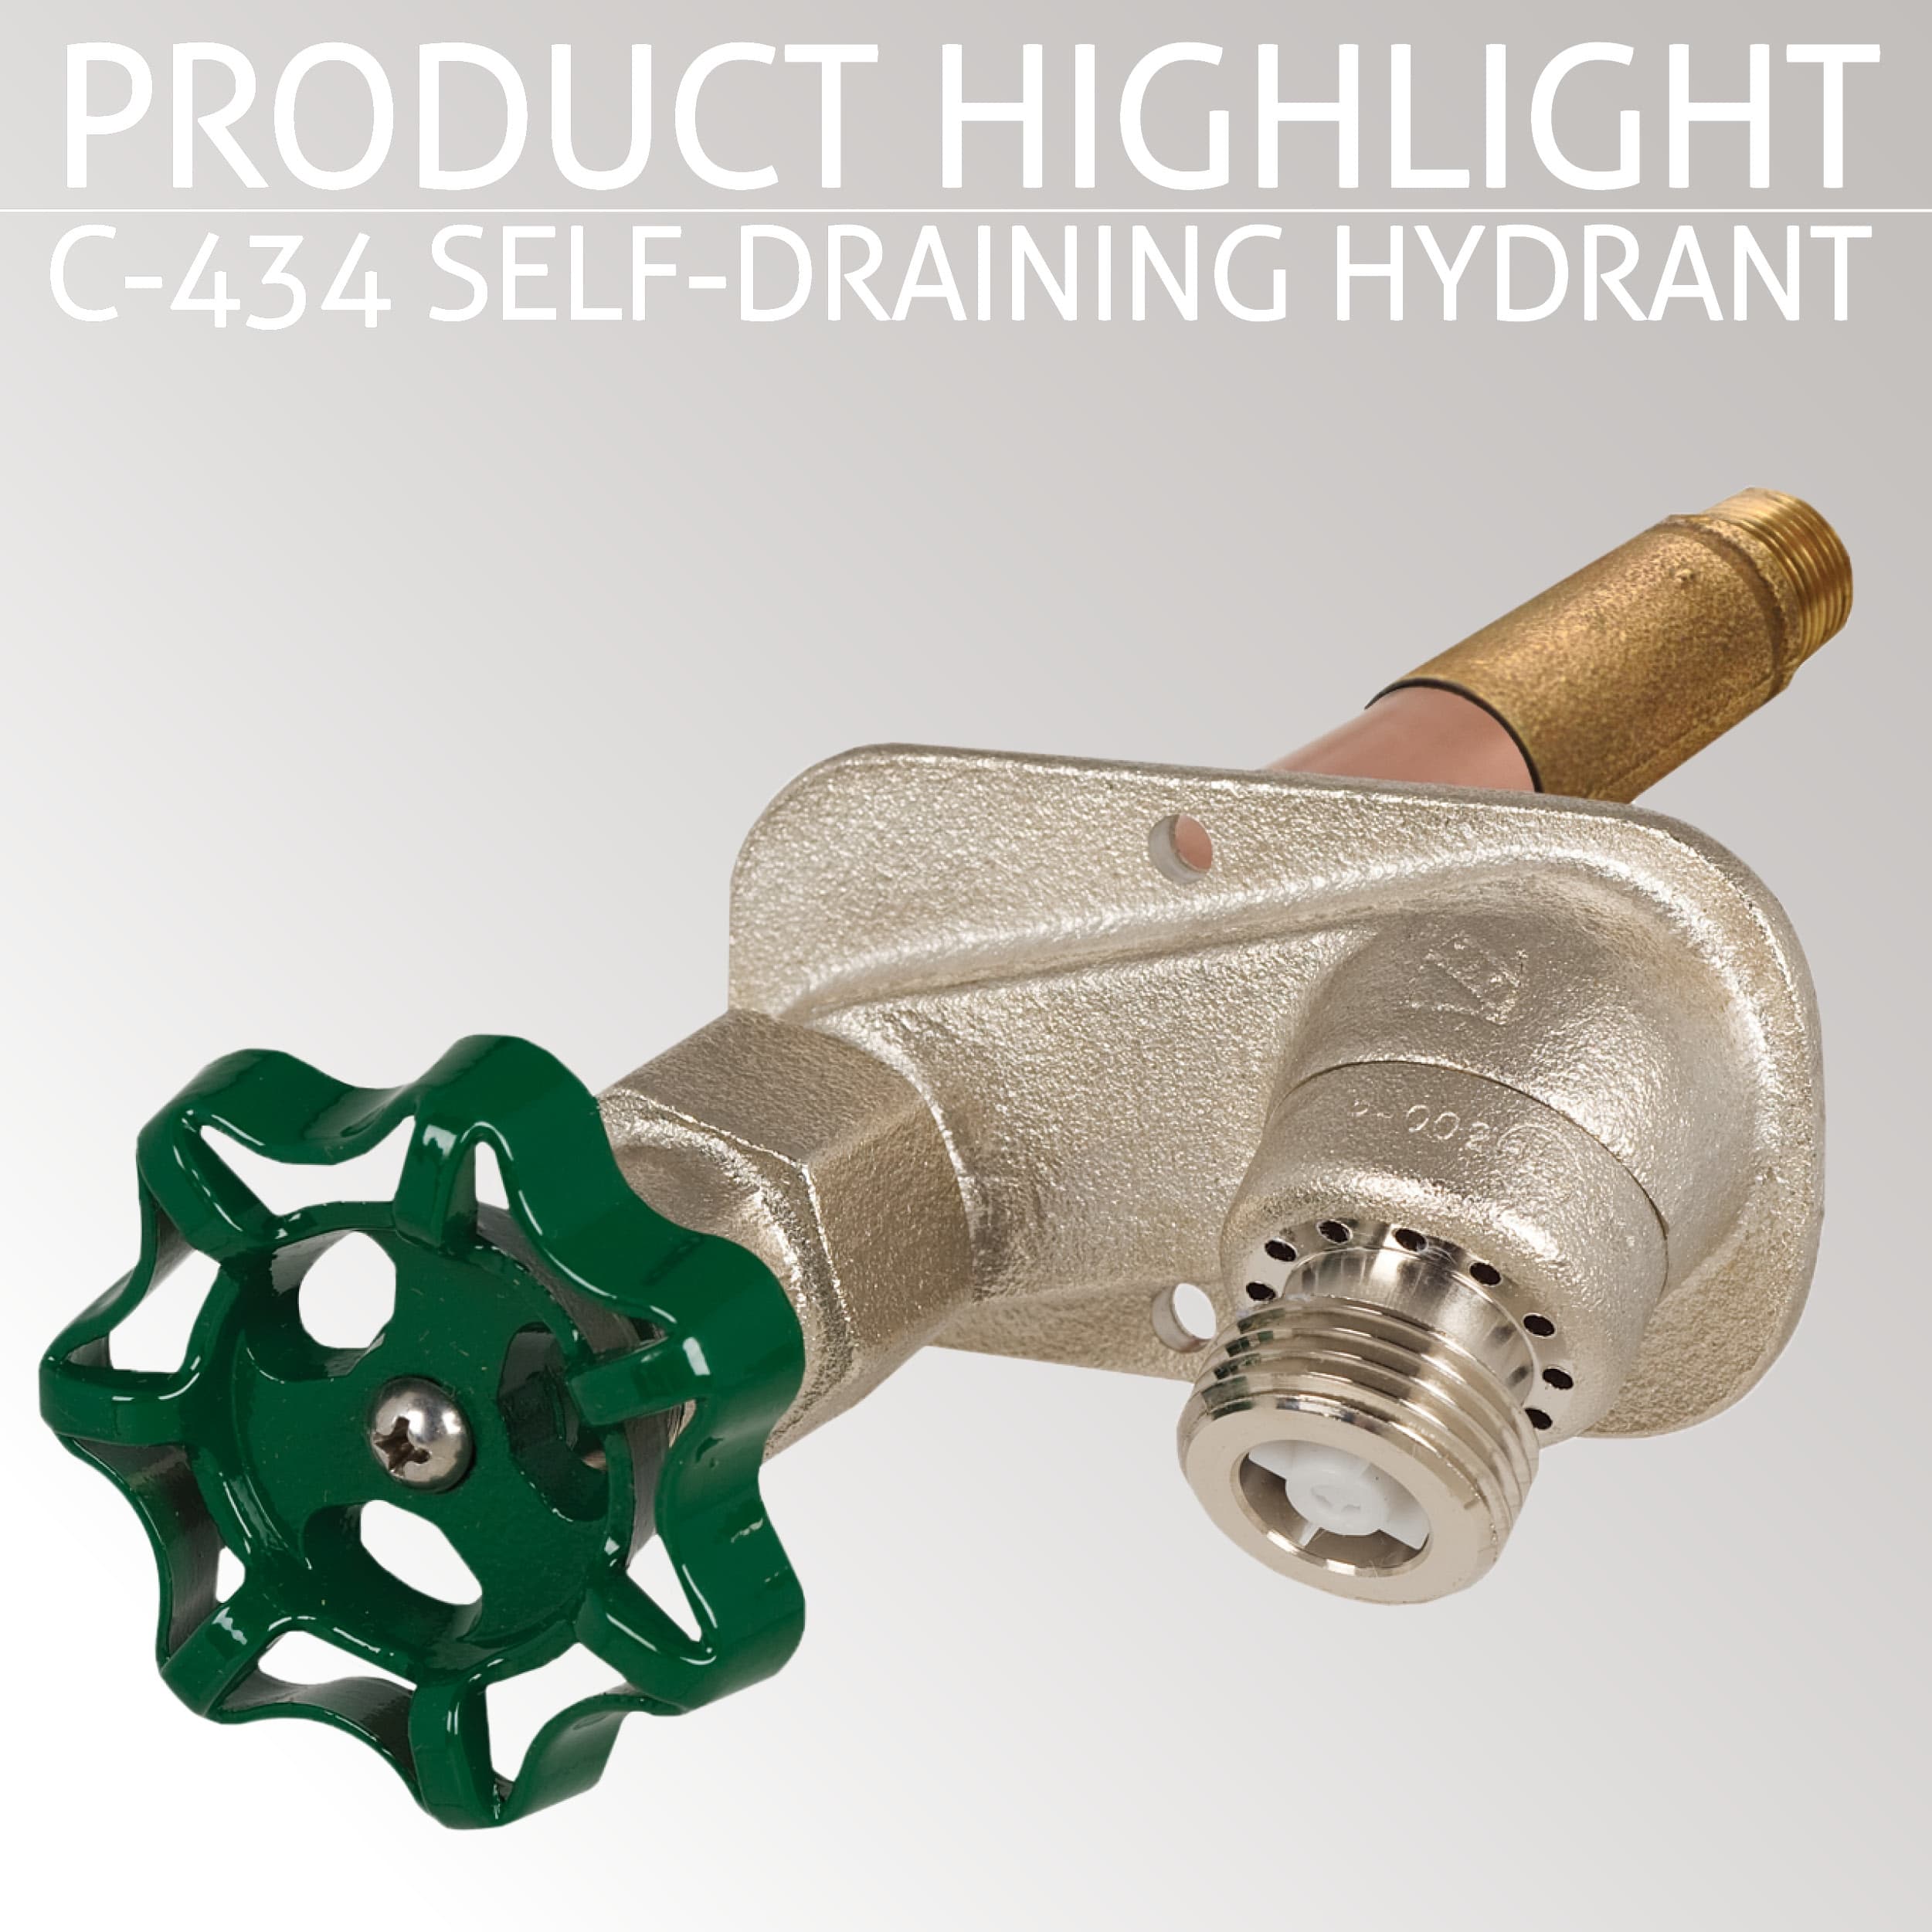 Product Highlight: C-434